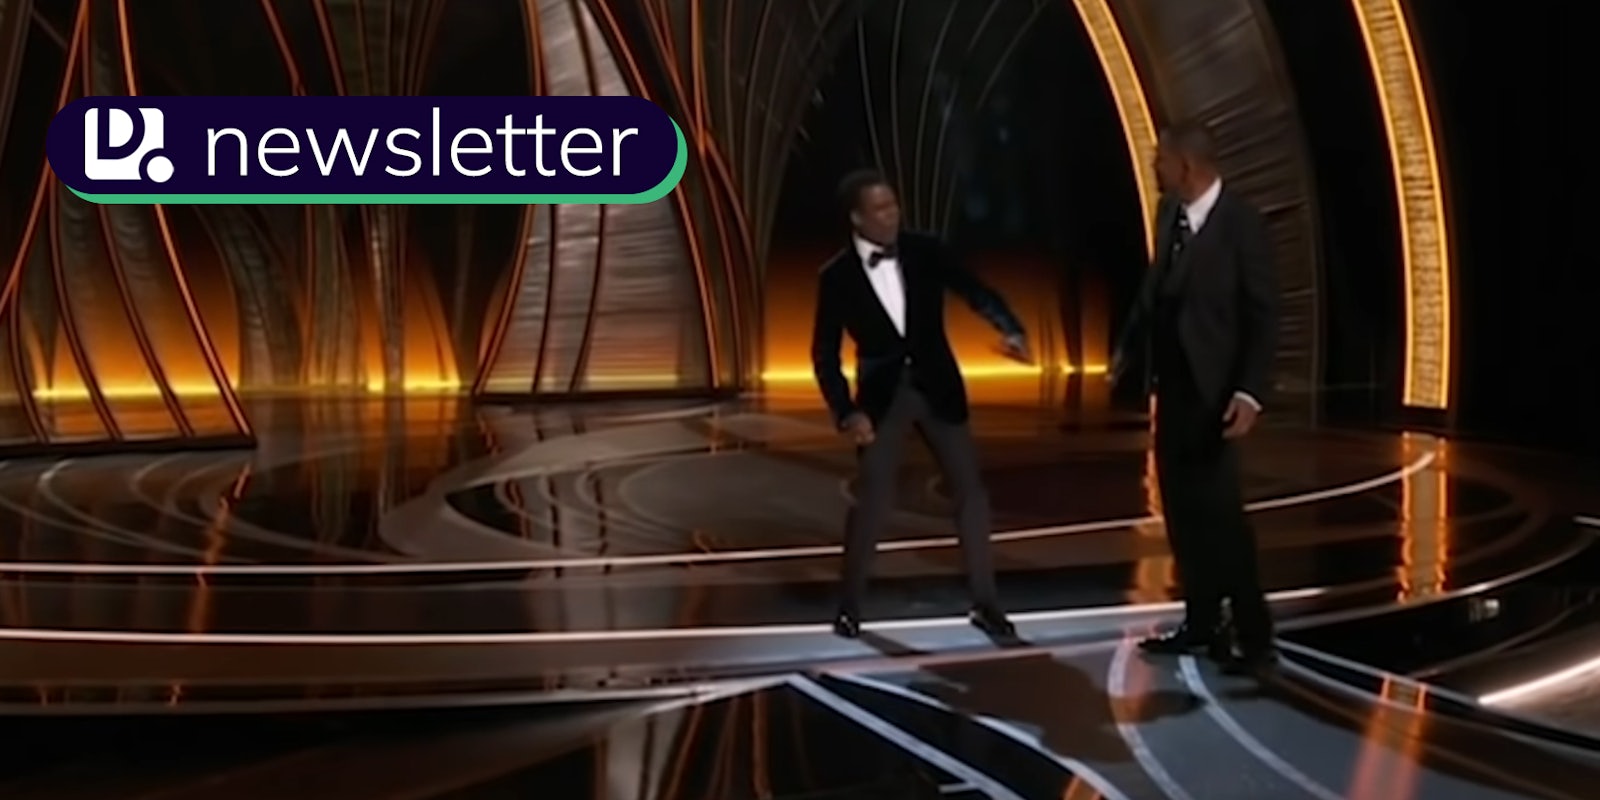 Will Smith slapping Chris Rock at the Oscars, known as 'the Slap.' The Daily Dot newsletter logo is in the top left corner.